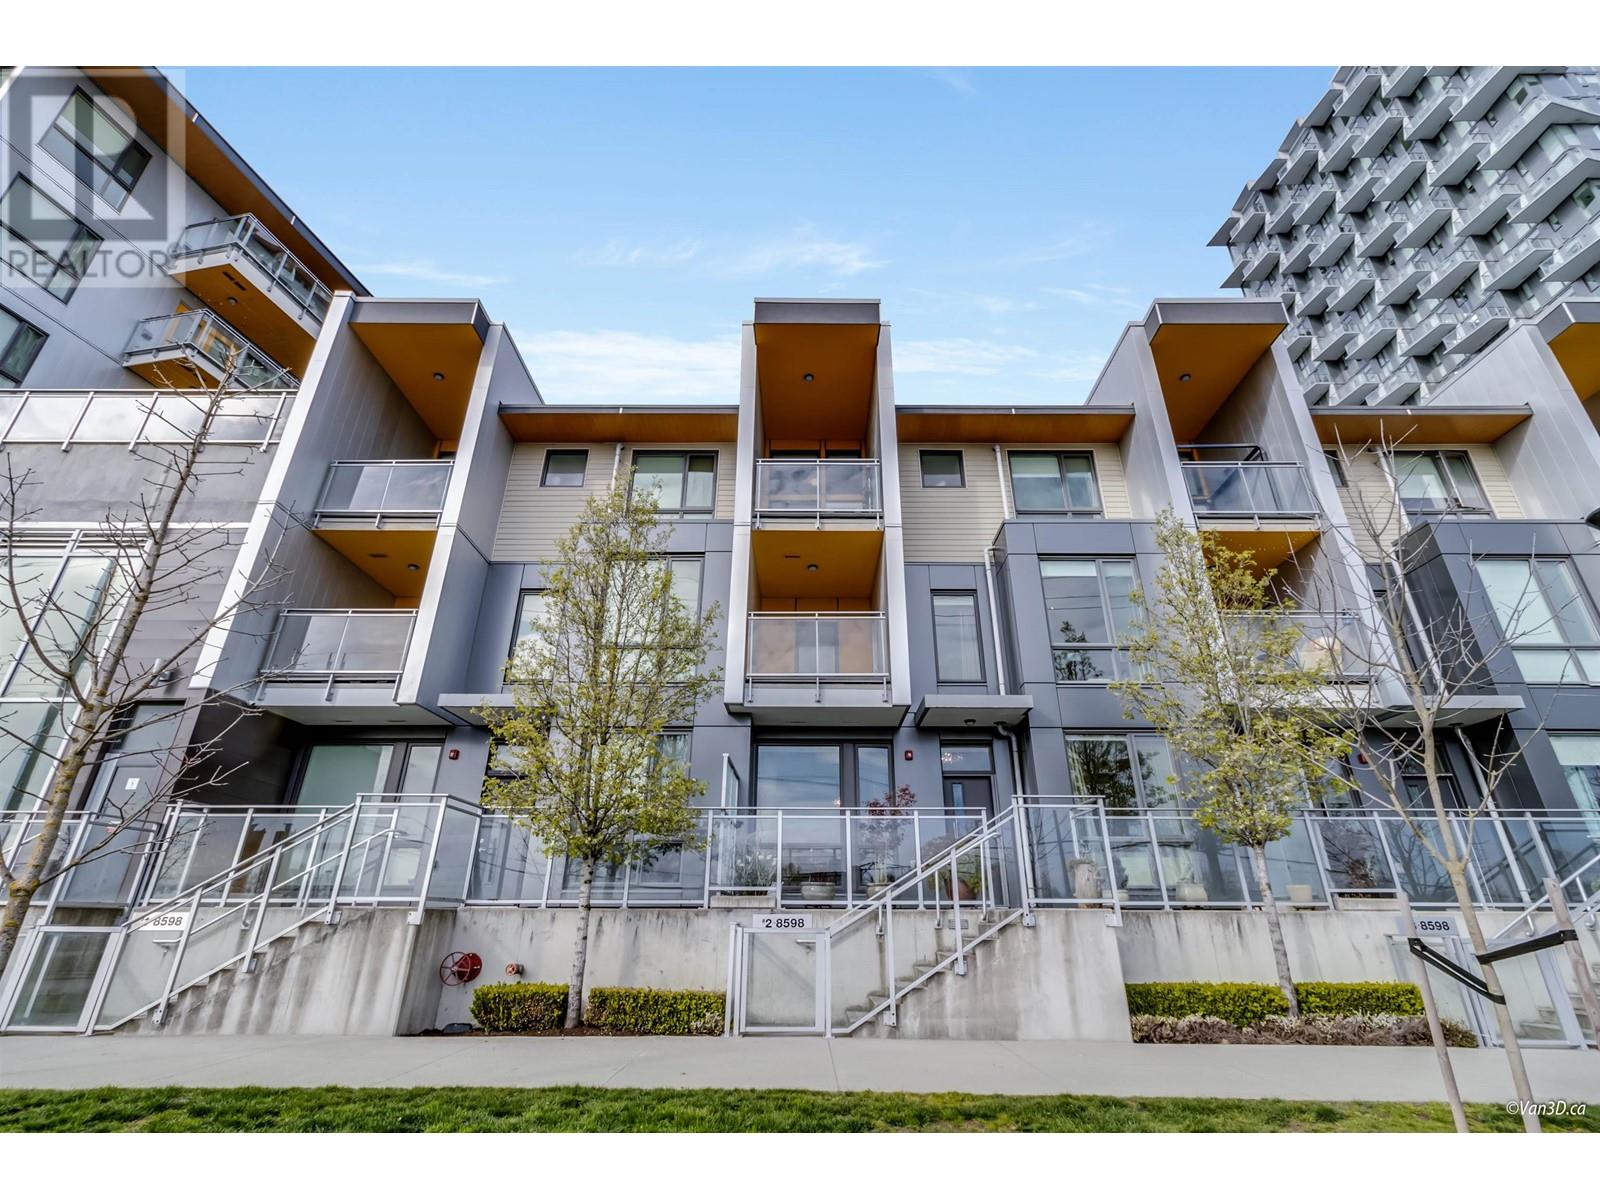 2 8598 RIVER DISTRICT CROSSING, Vancouver